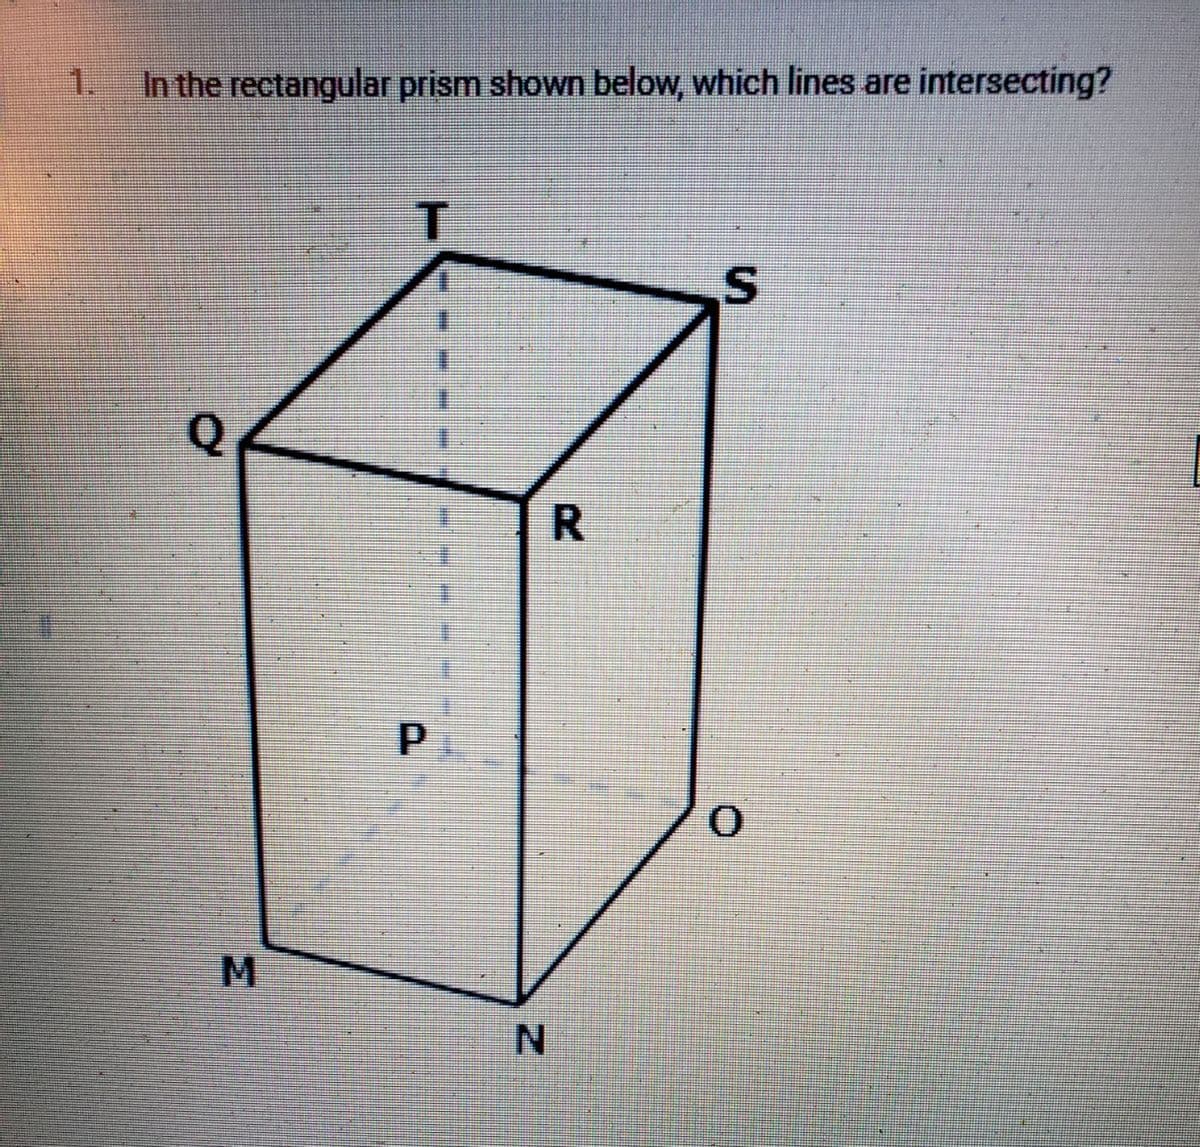 1.
In the rectangular prism shown below, which lines are intersecting?
T
Q
R
S
P
0
M
N